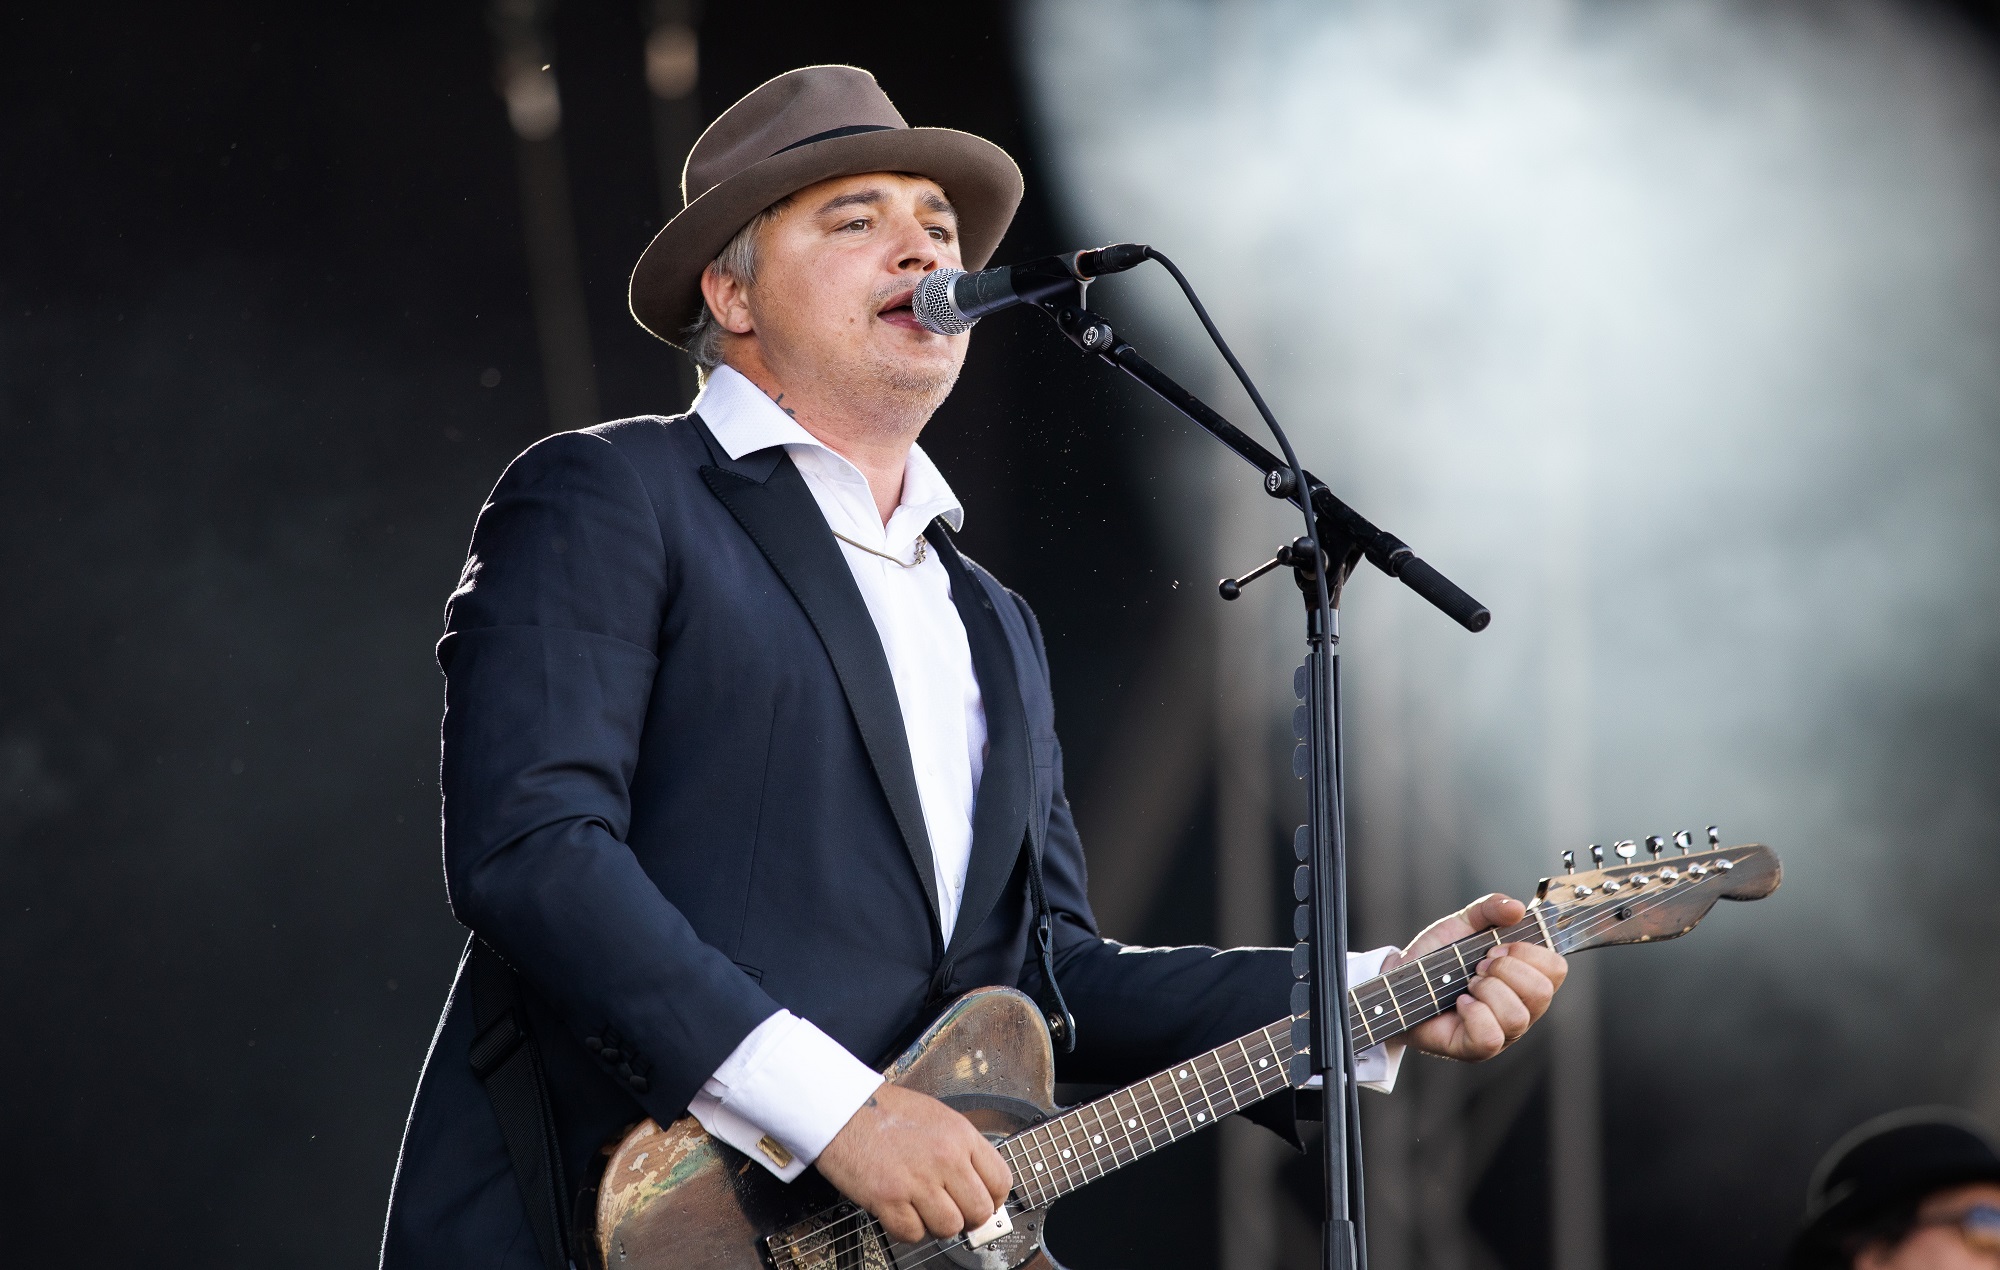 Watch Pete Doherty perform The Pogues’ ‘Dirty Old Town’ in Ukrainian on TV